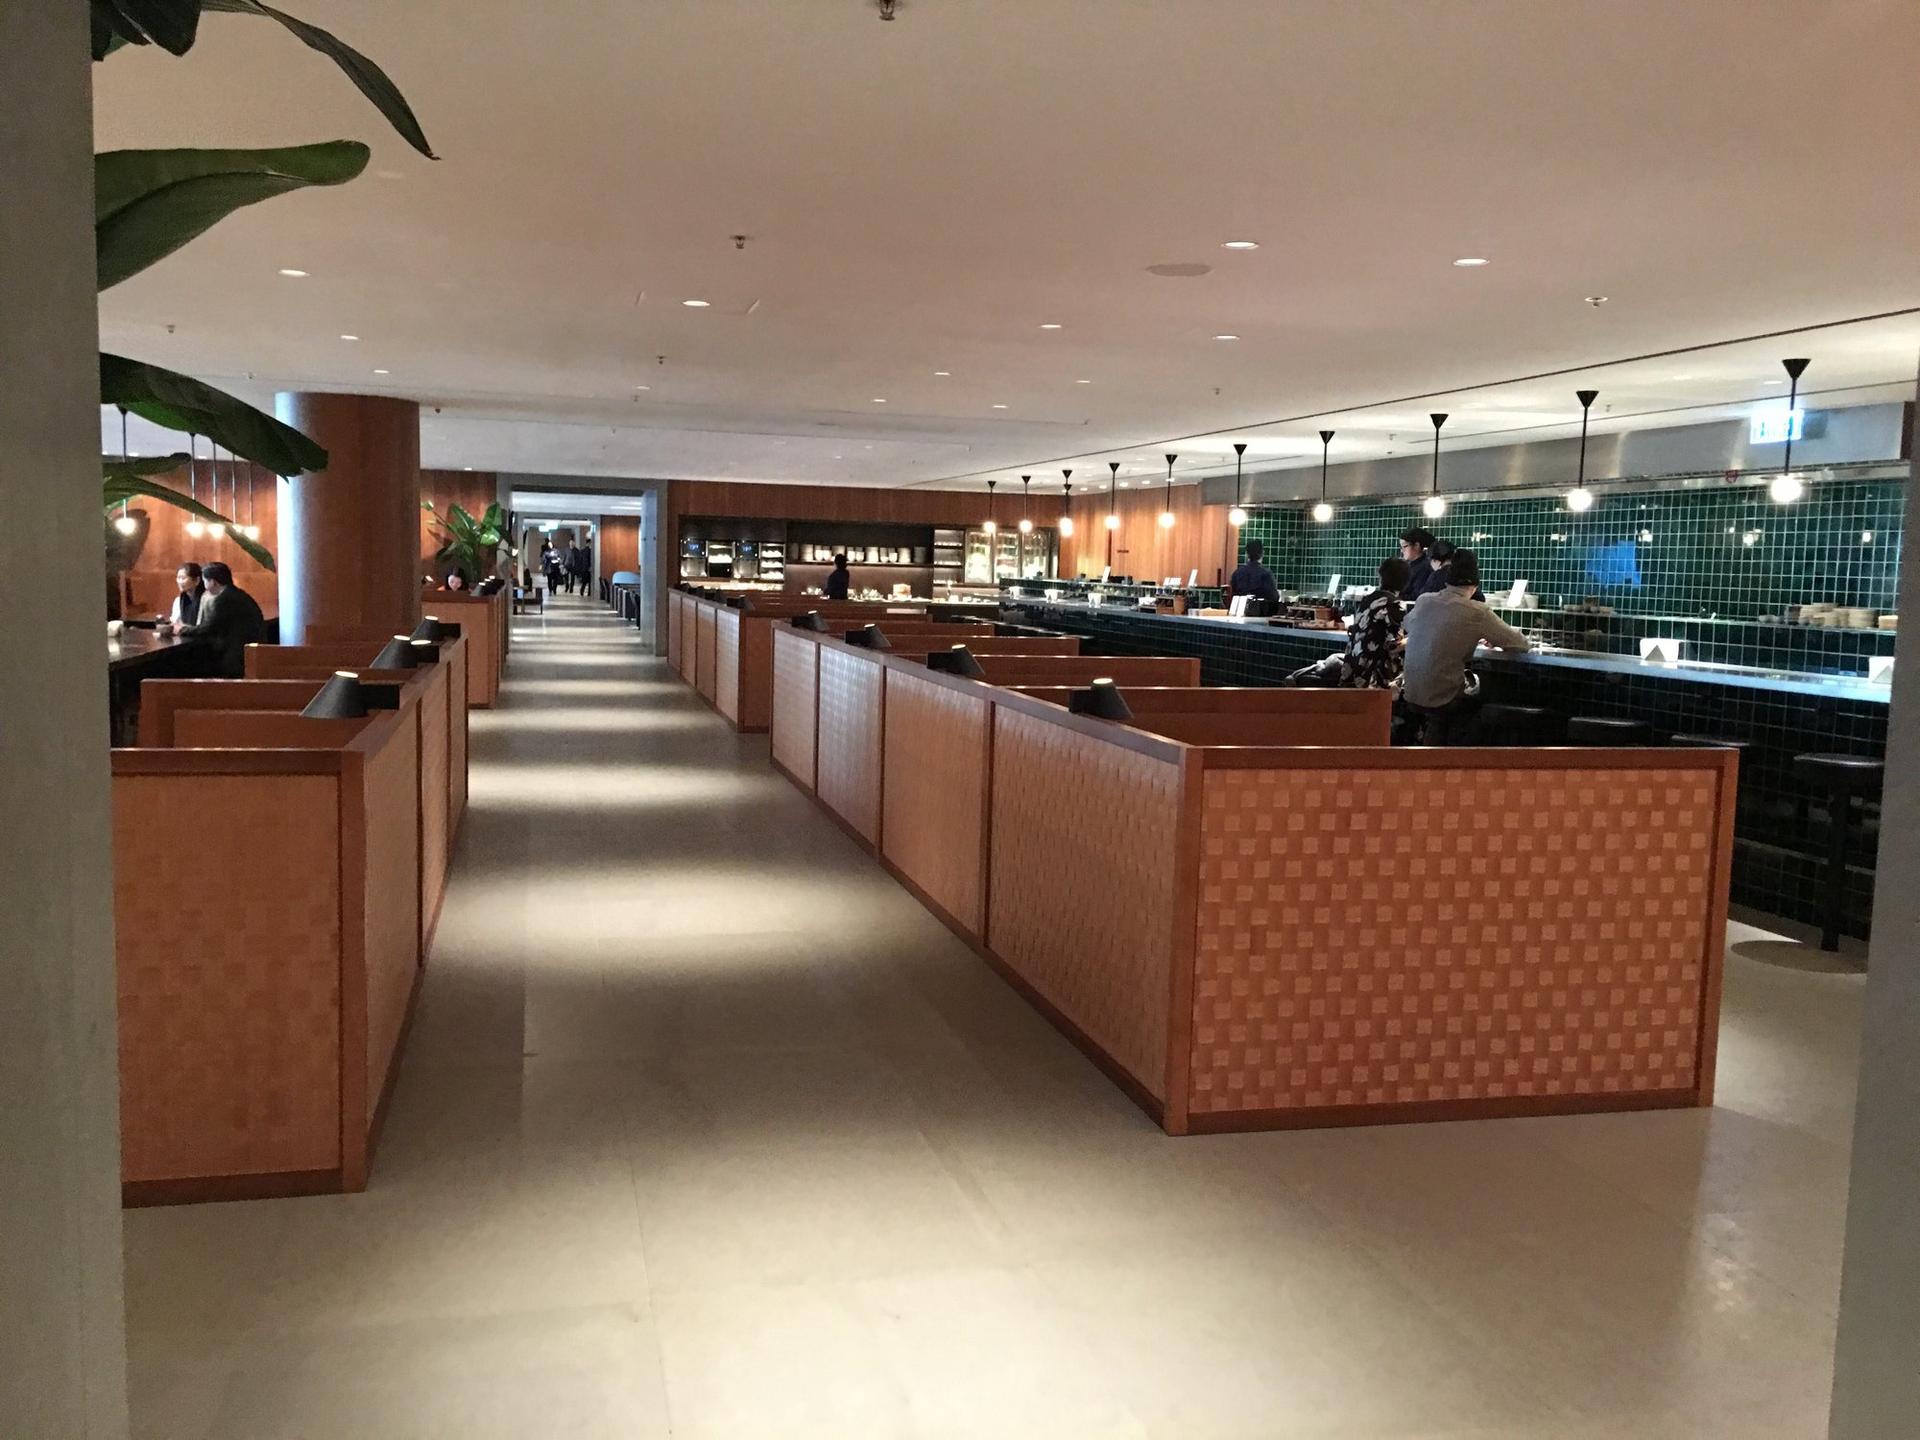 Cathay Pacific The Pier Business Class Lounge image 31 of 61